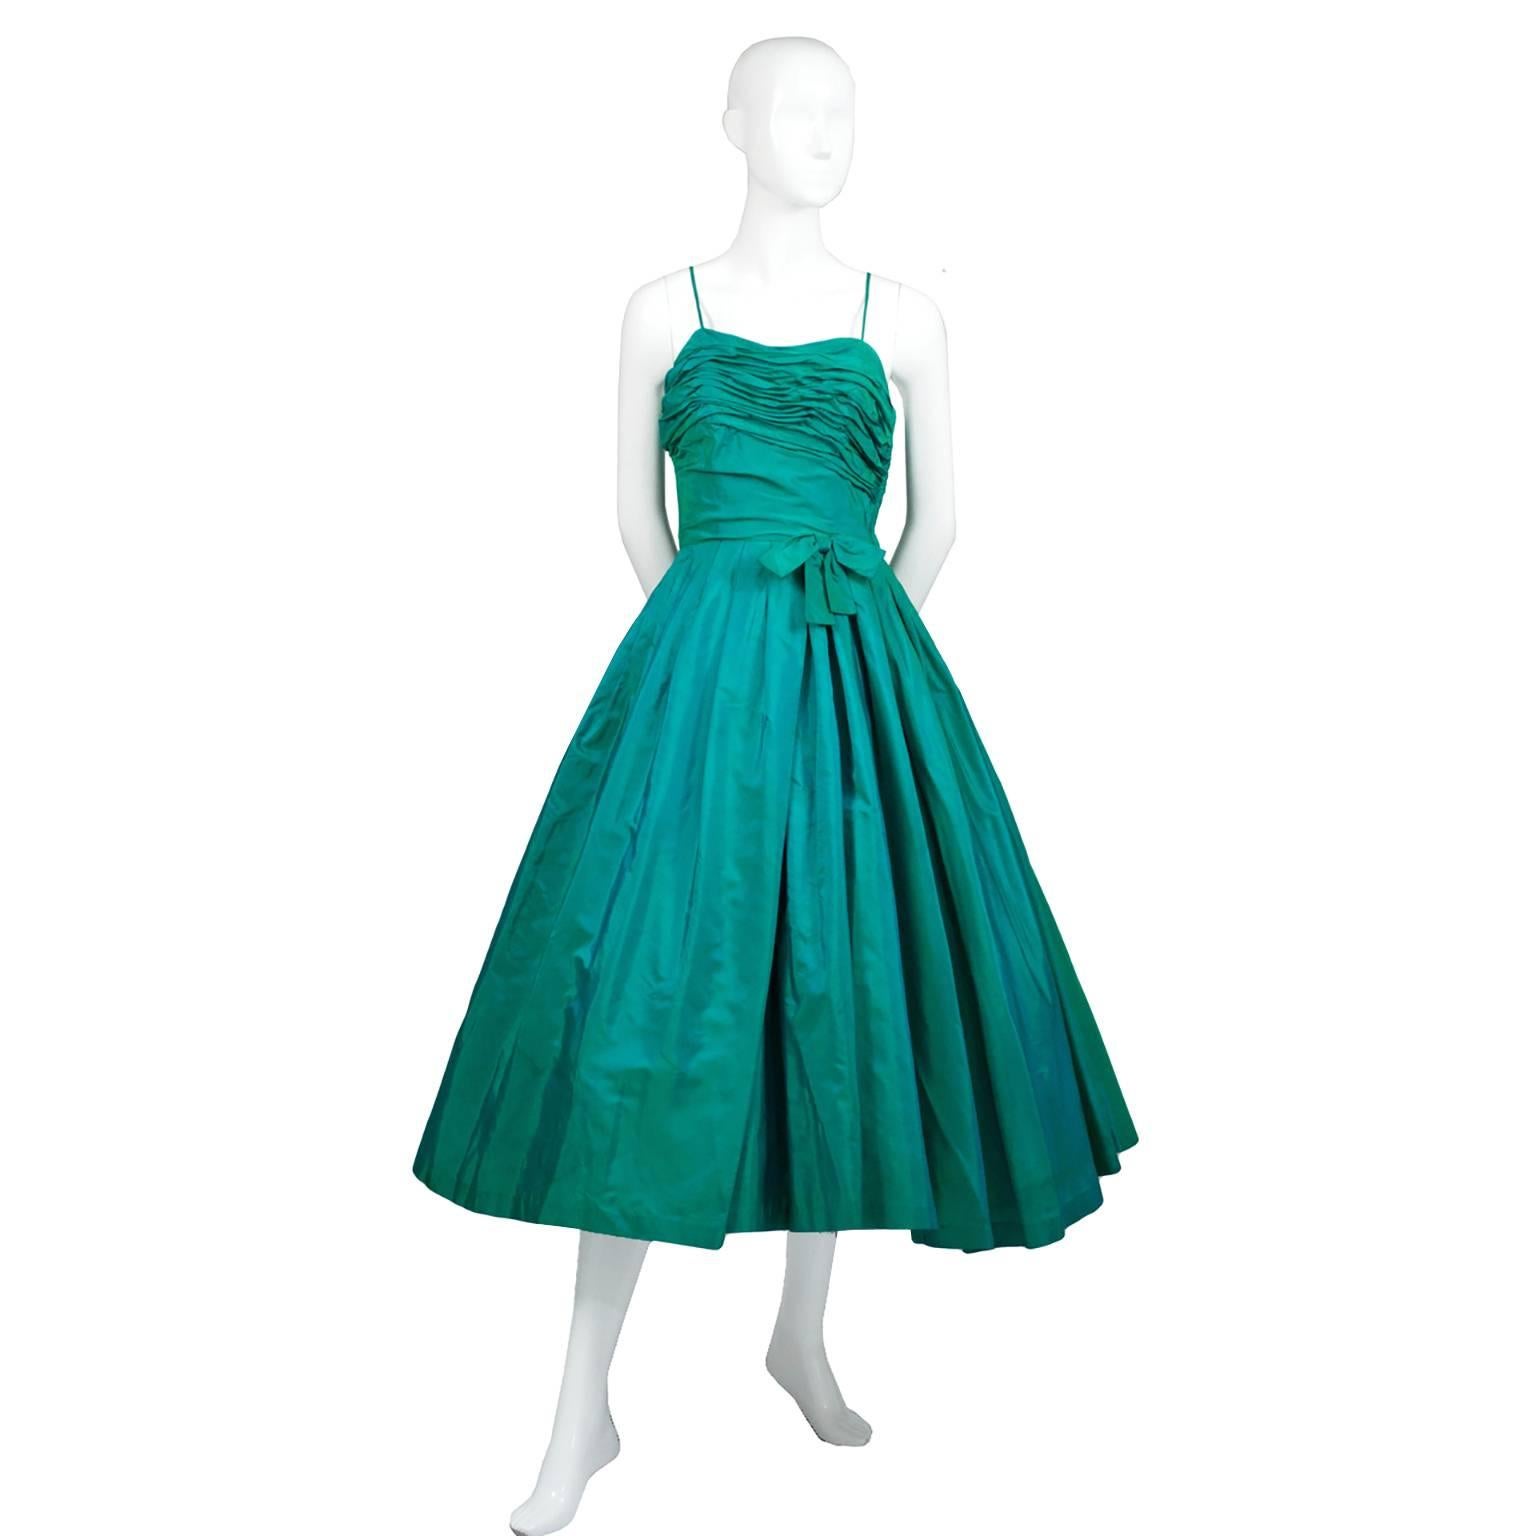 This is a fabulous vintage party dress in a gorgeous iridescent green taffeta from Cotillion Formals. This pretty 1950's dress has a lovely ruched bodice, spaghetti straps and a side metal zipper. There is a built in royal blue tulle slip and stays